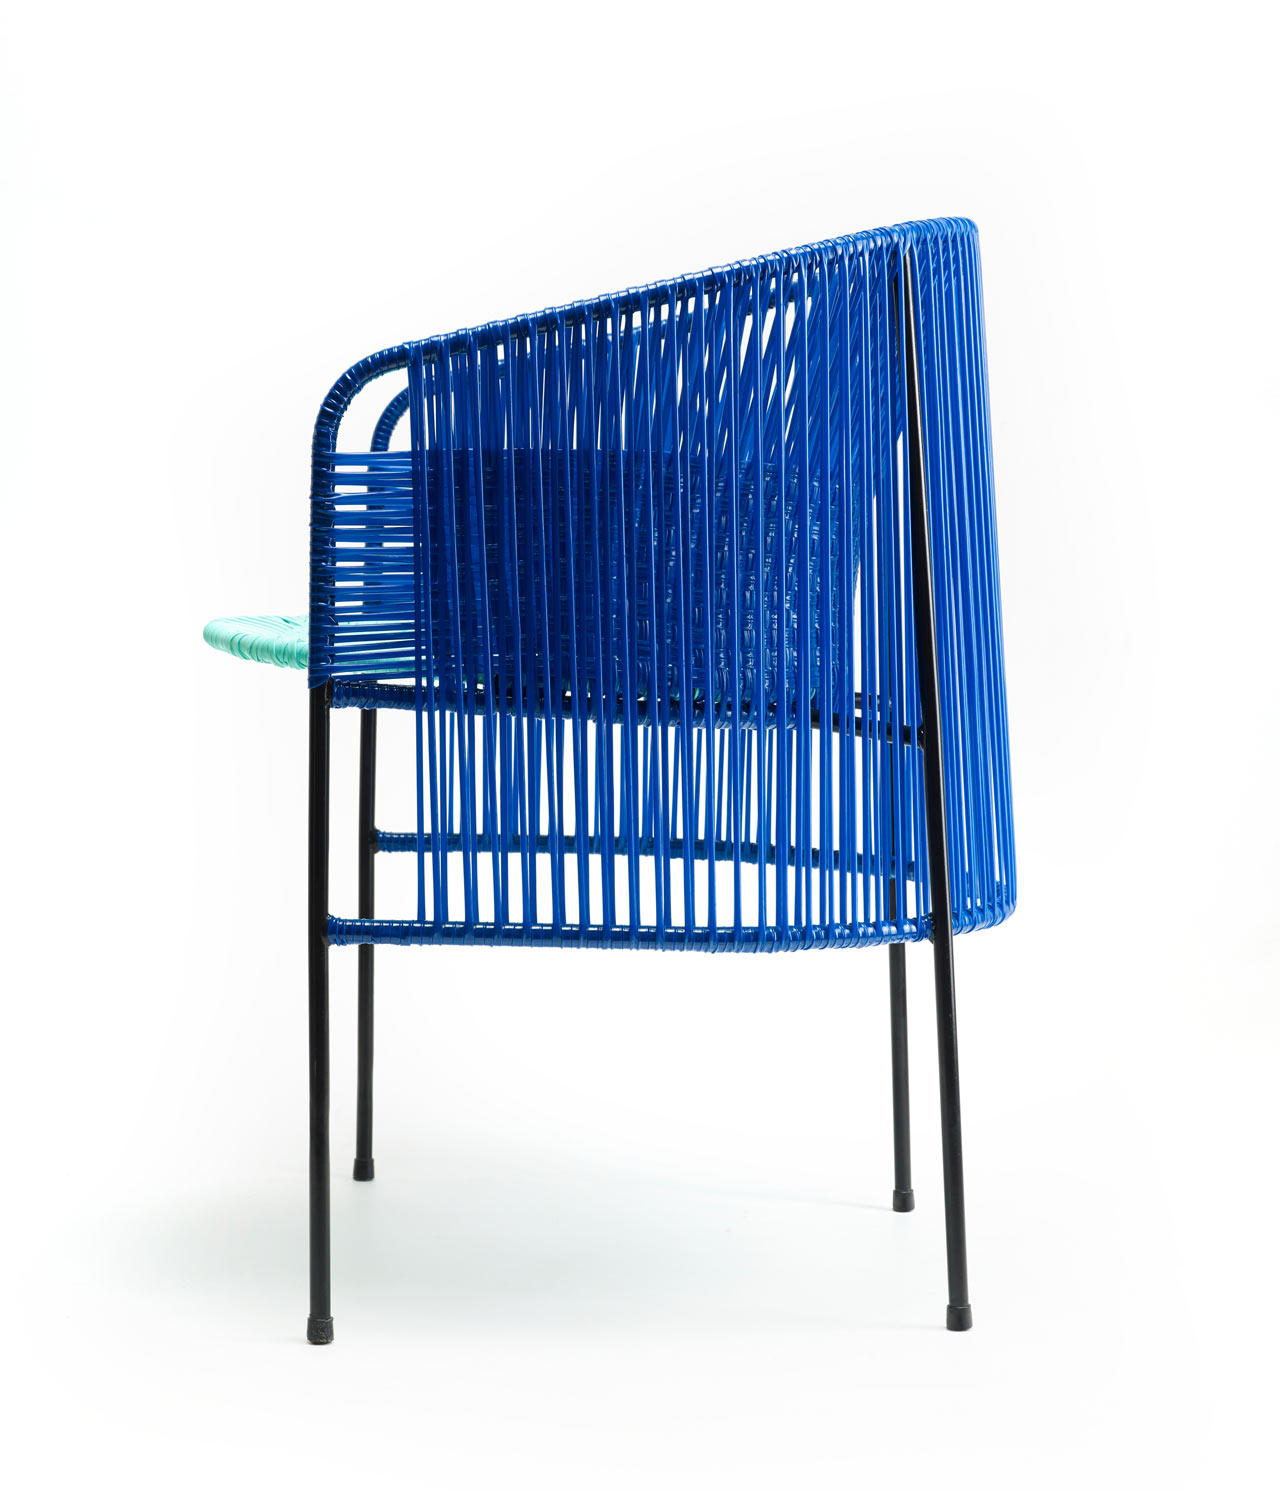 ames Launches CARIBE, a Colorful Outdoor Collection Made of Recycled Plastic-7